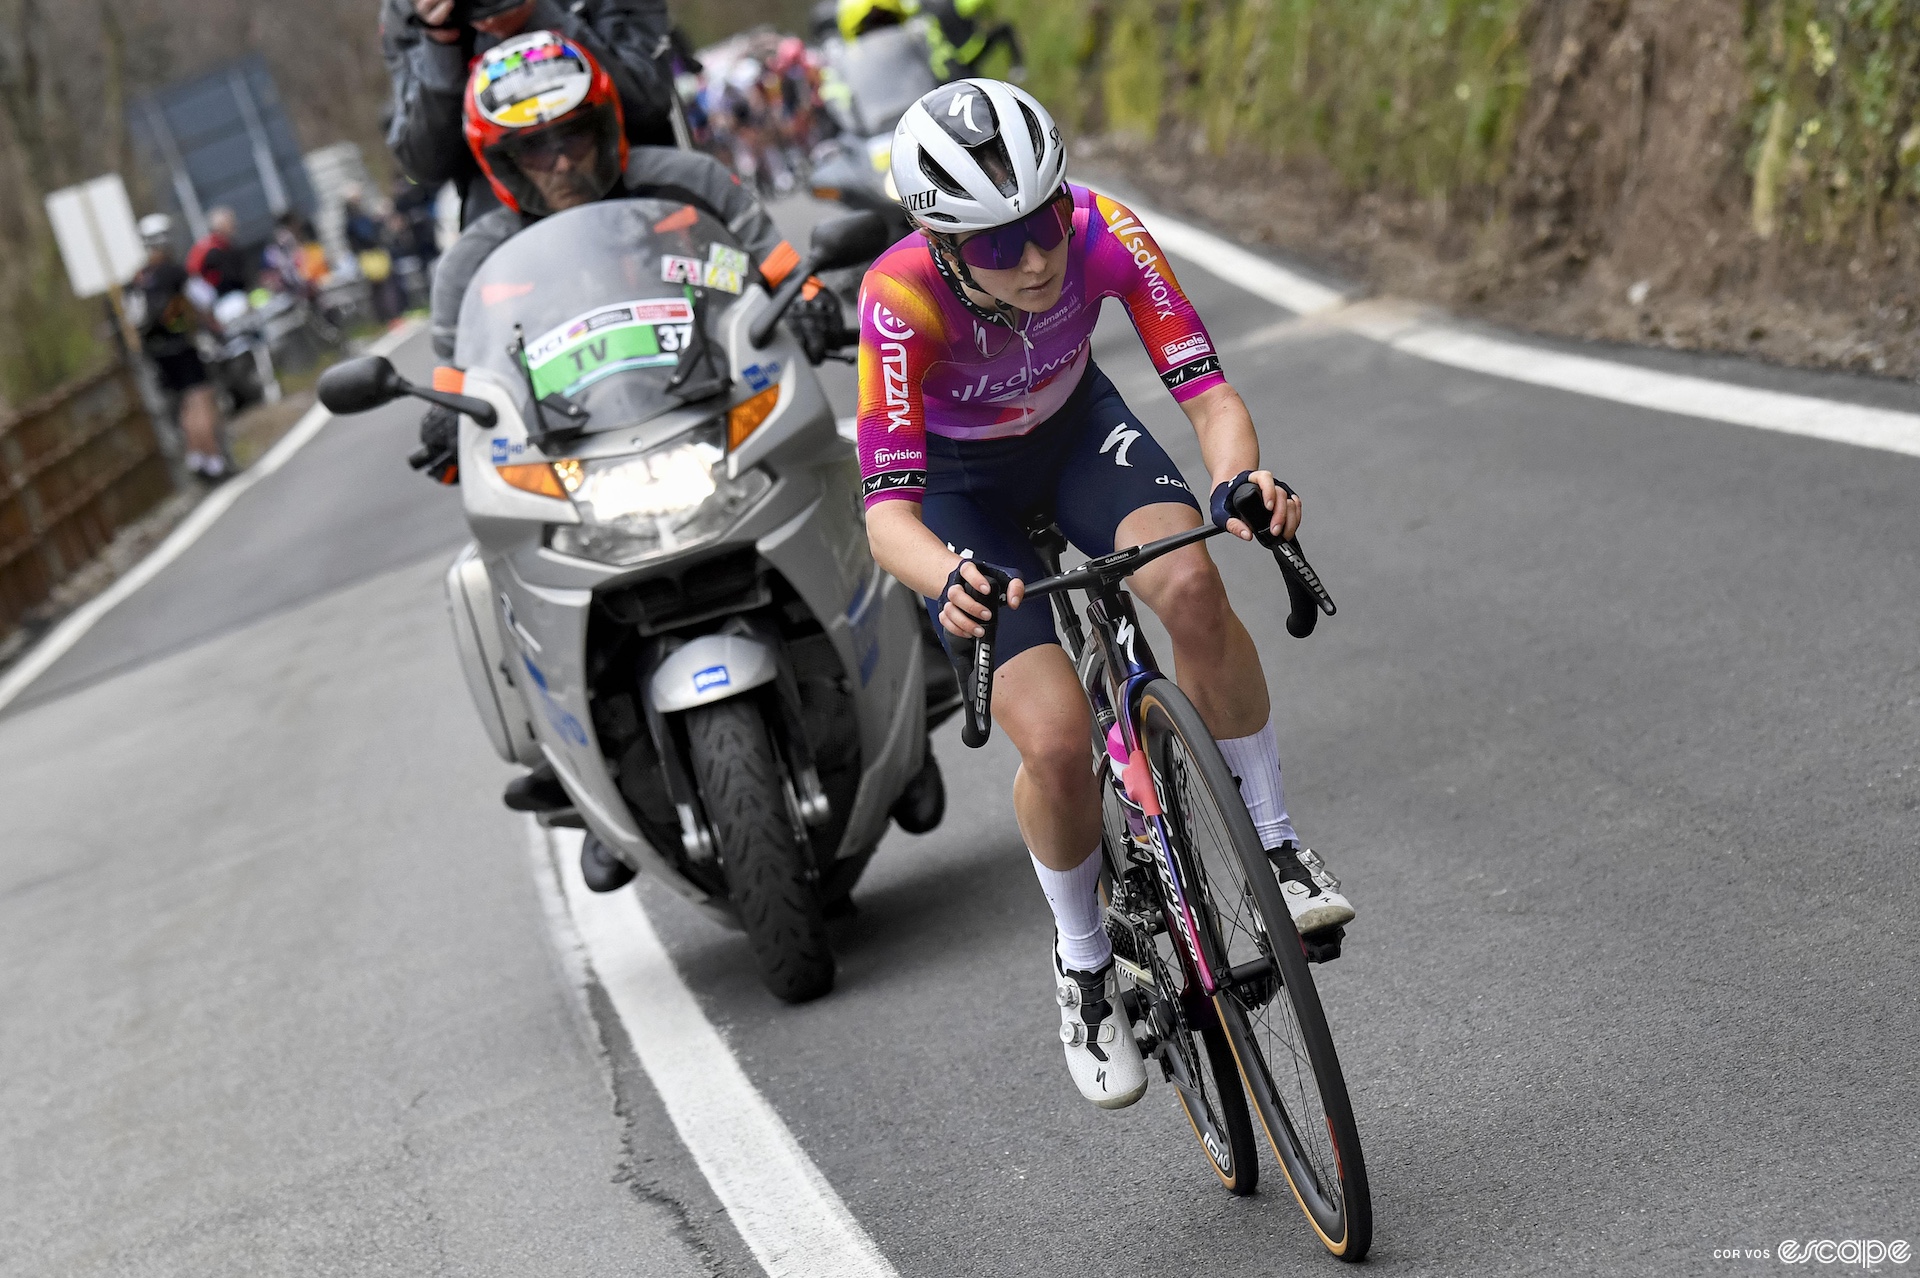 Niamh Fisher-Black rides in a solo breakaway at Trofeo Alfredo Binda. The pack is close behind, partly obscured by a TV moto righ ton her wheel.